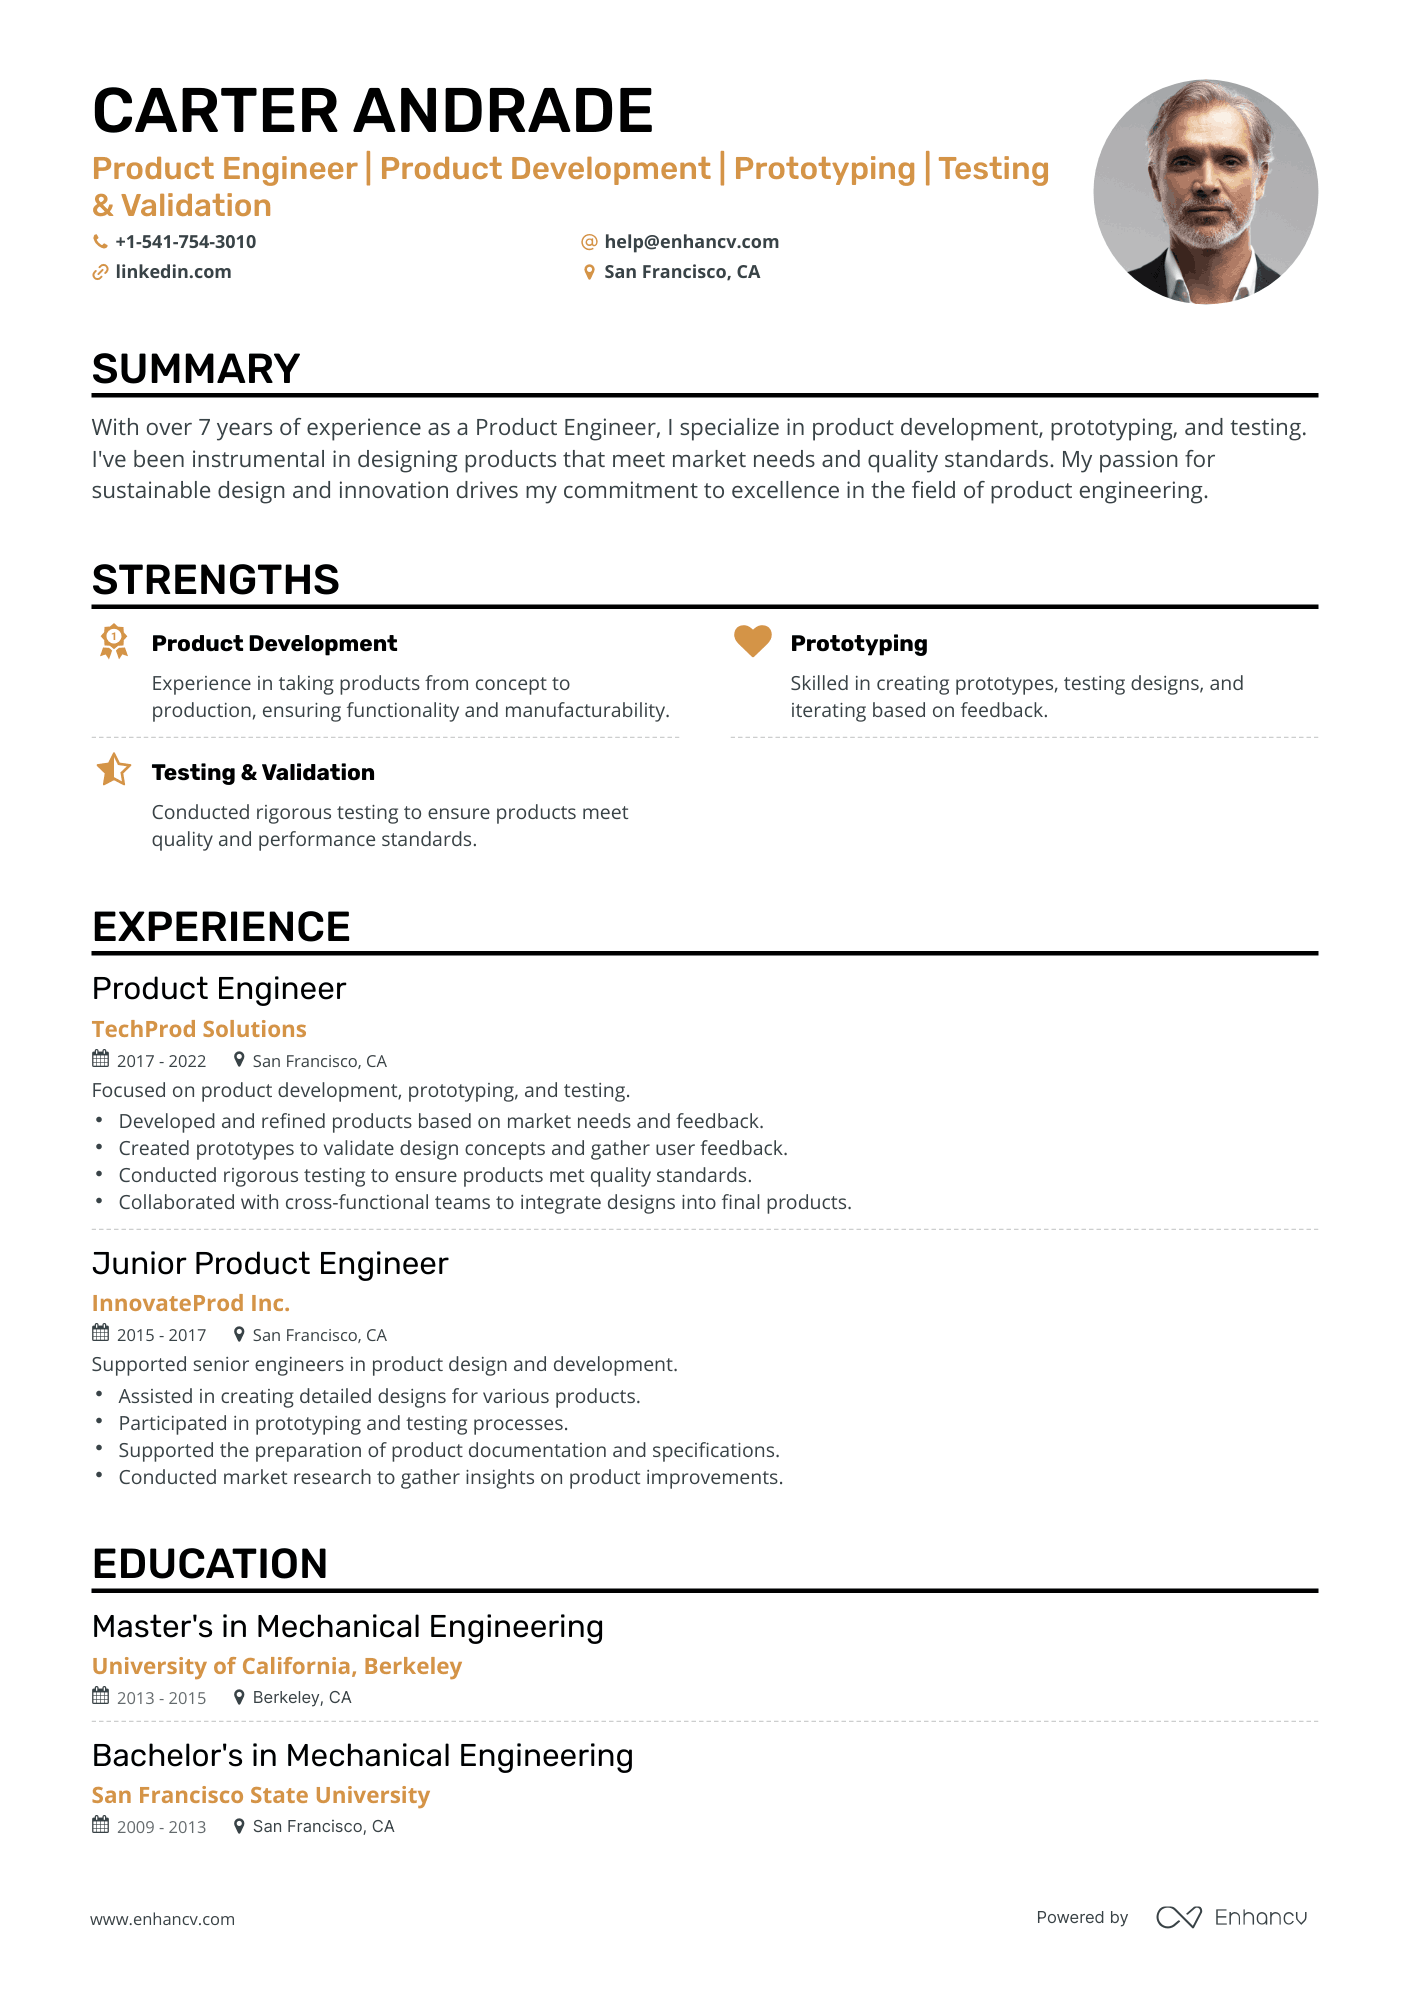 Classic Product Engineer Resume Template